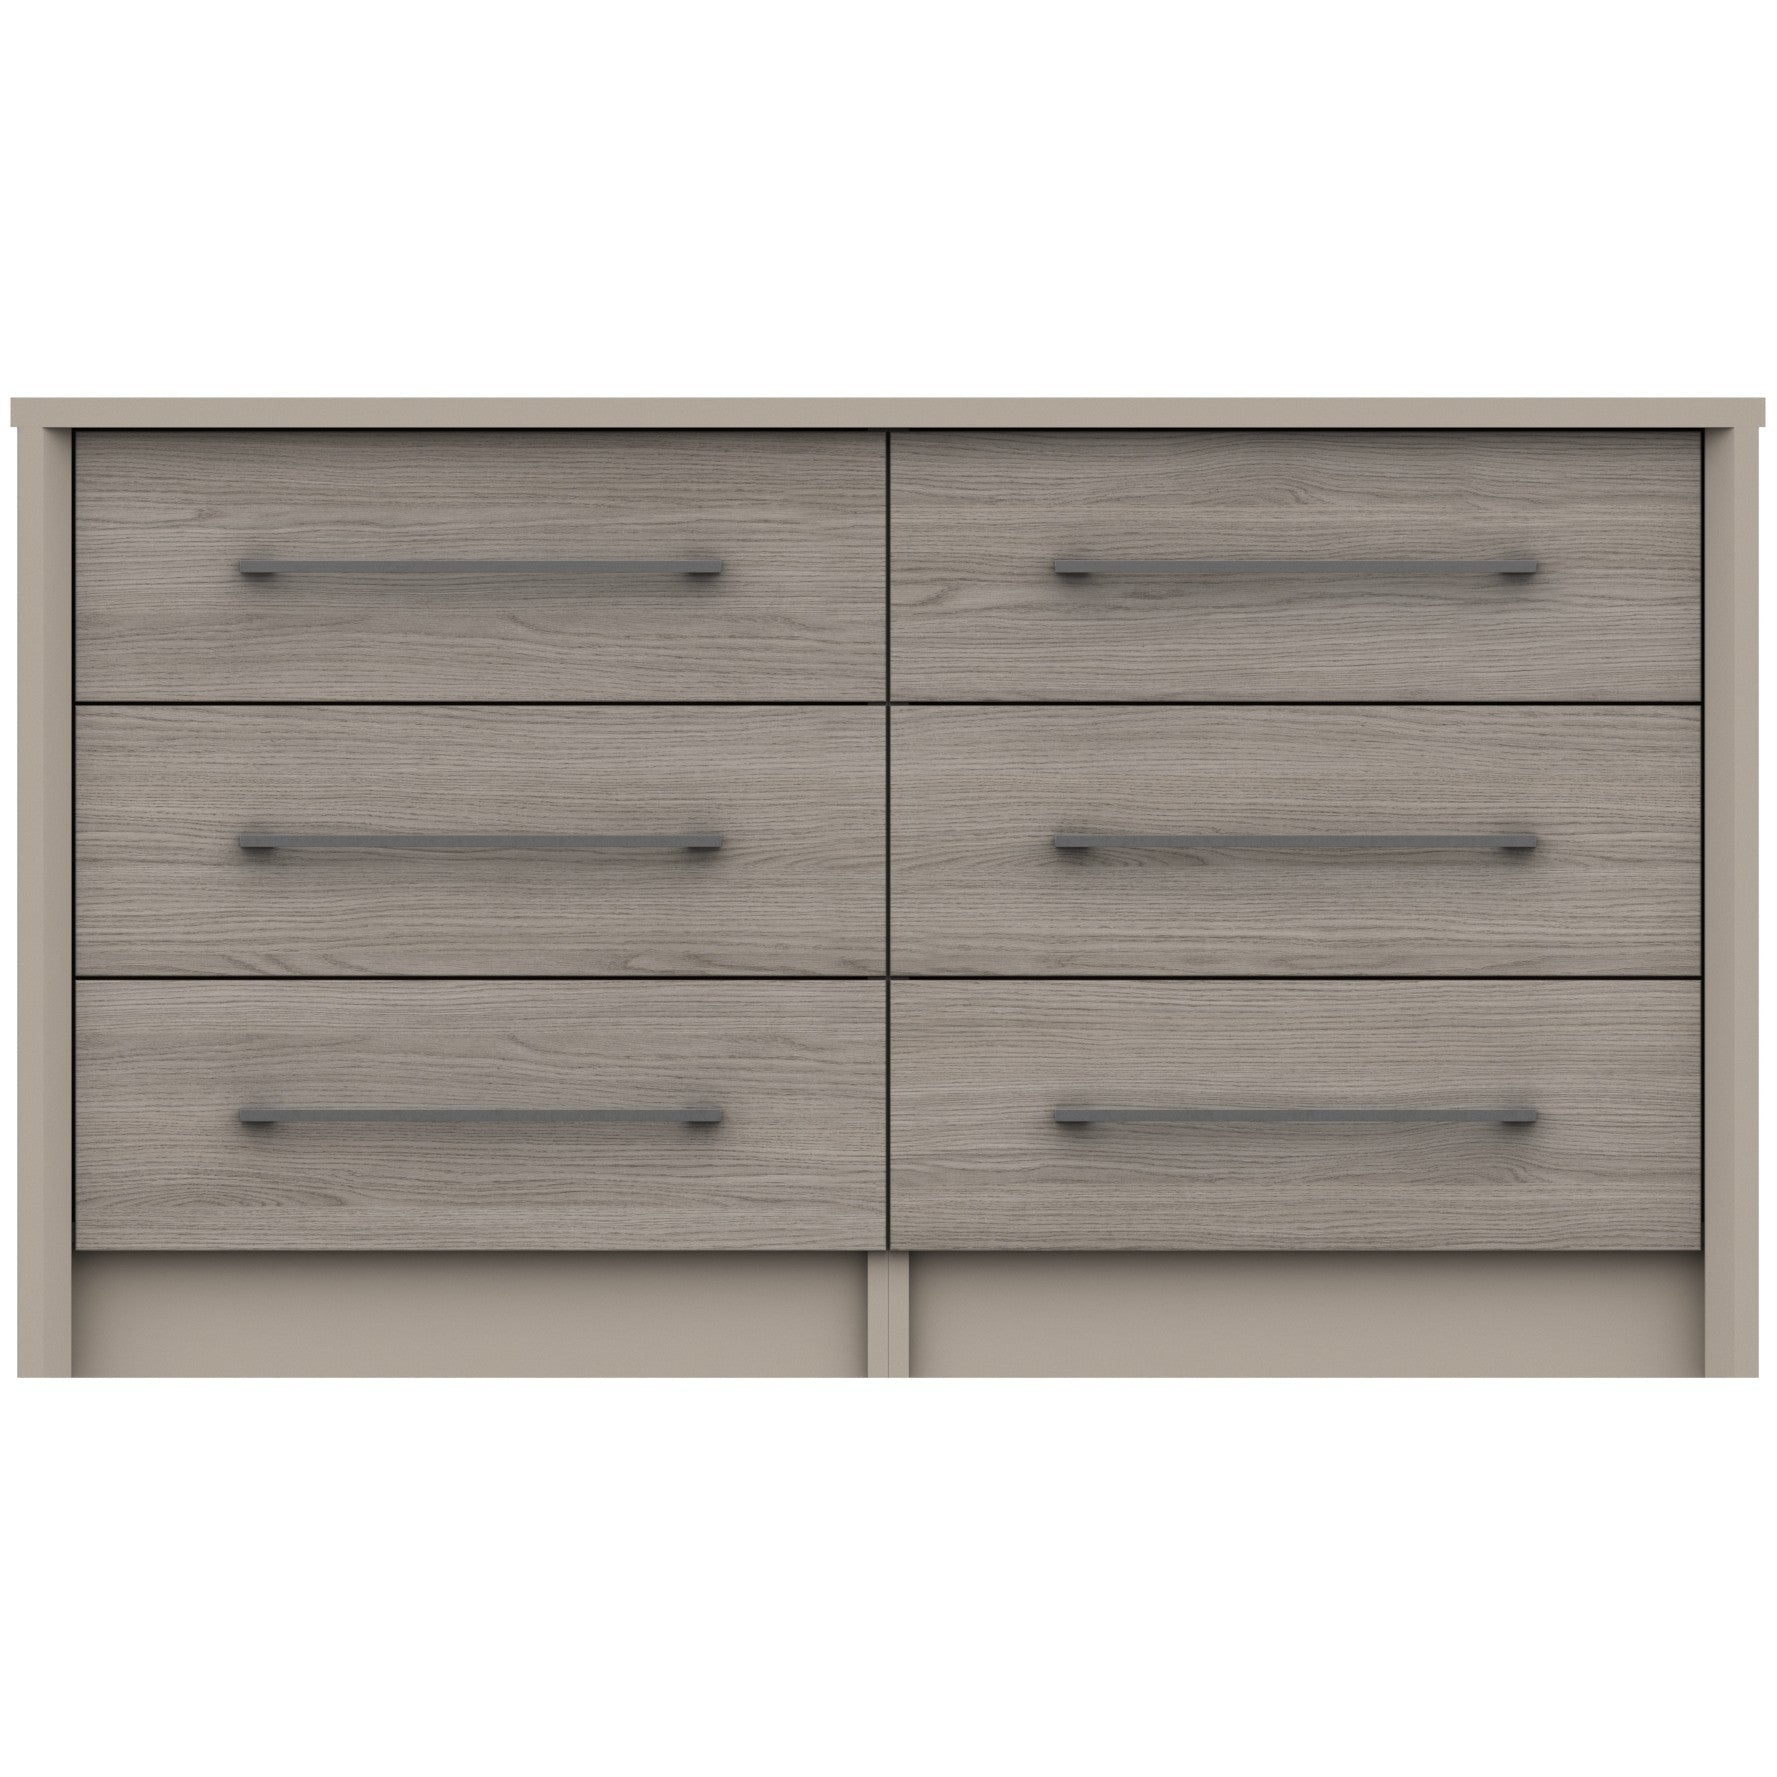 Burford 3 Drawer Double Chest